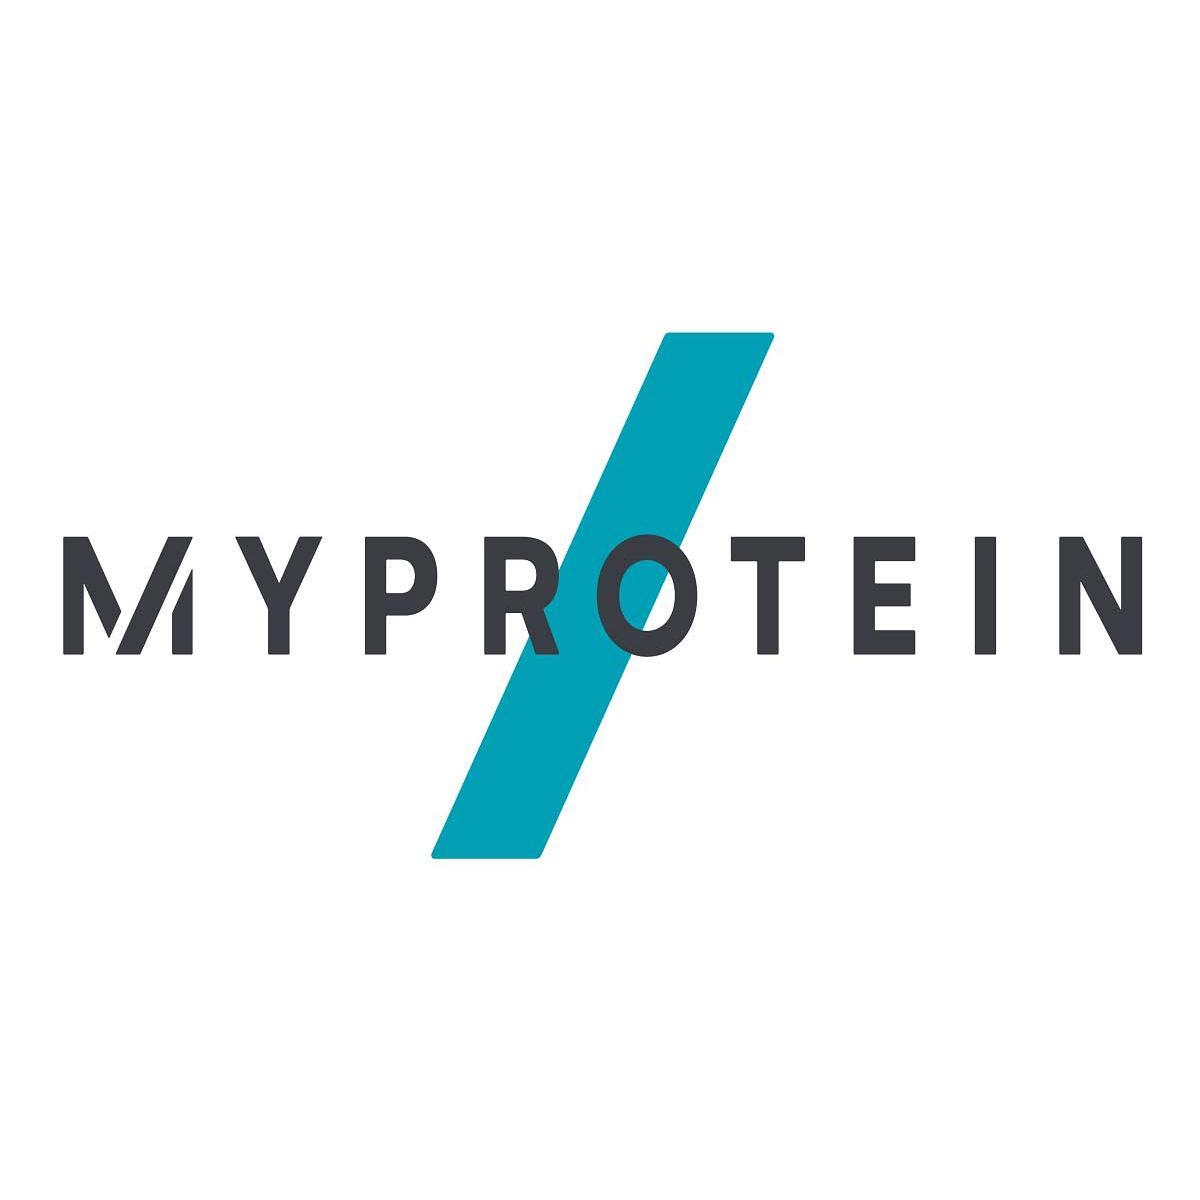 MyProtein promos and coupon codes